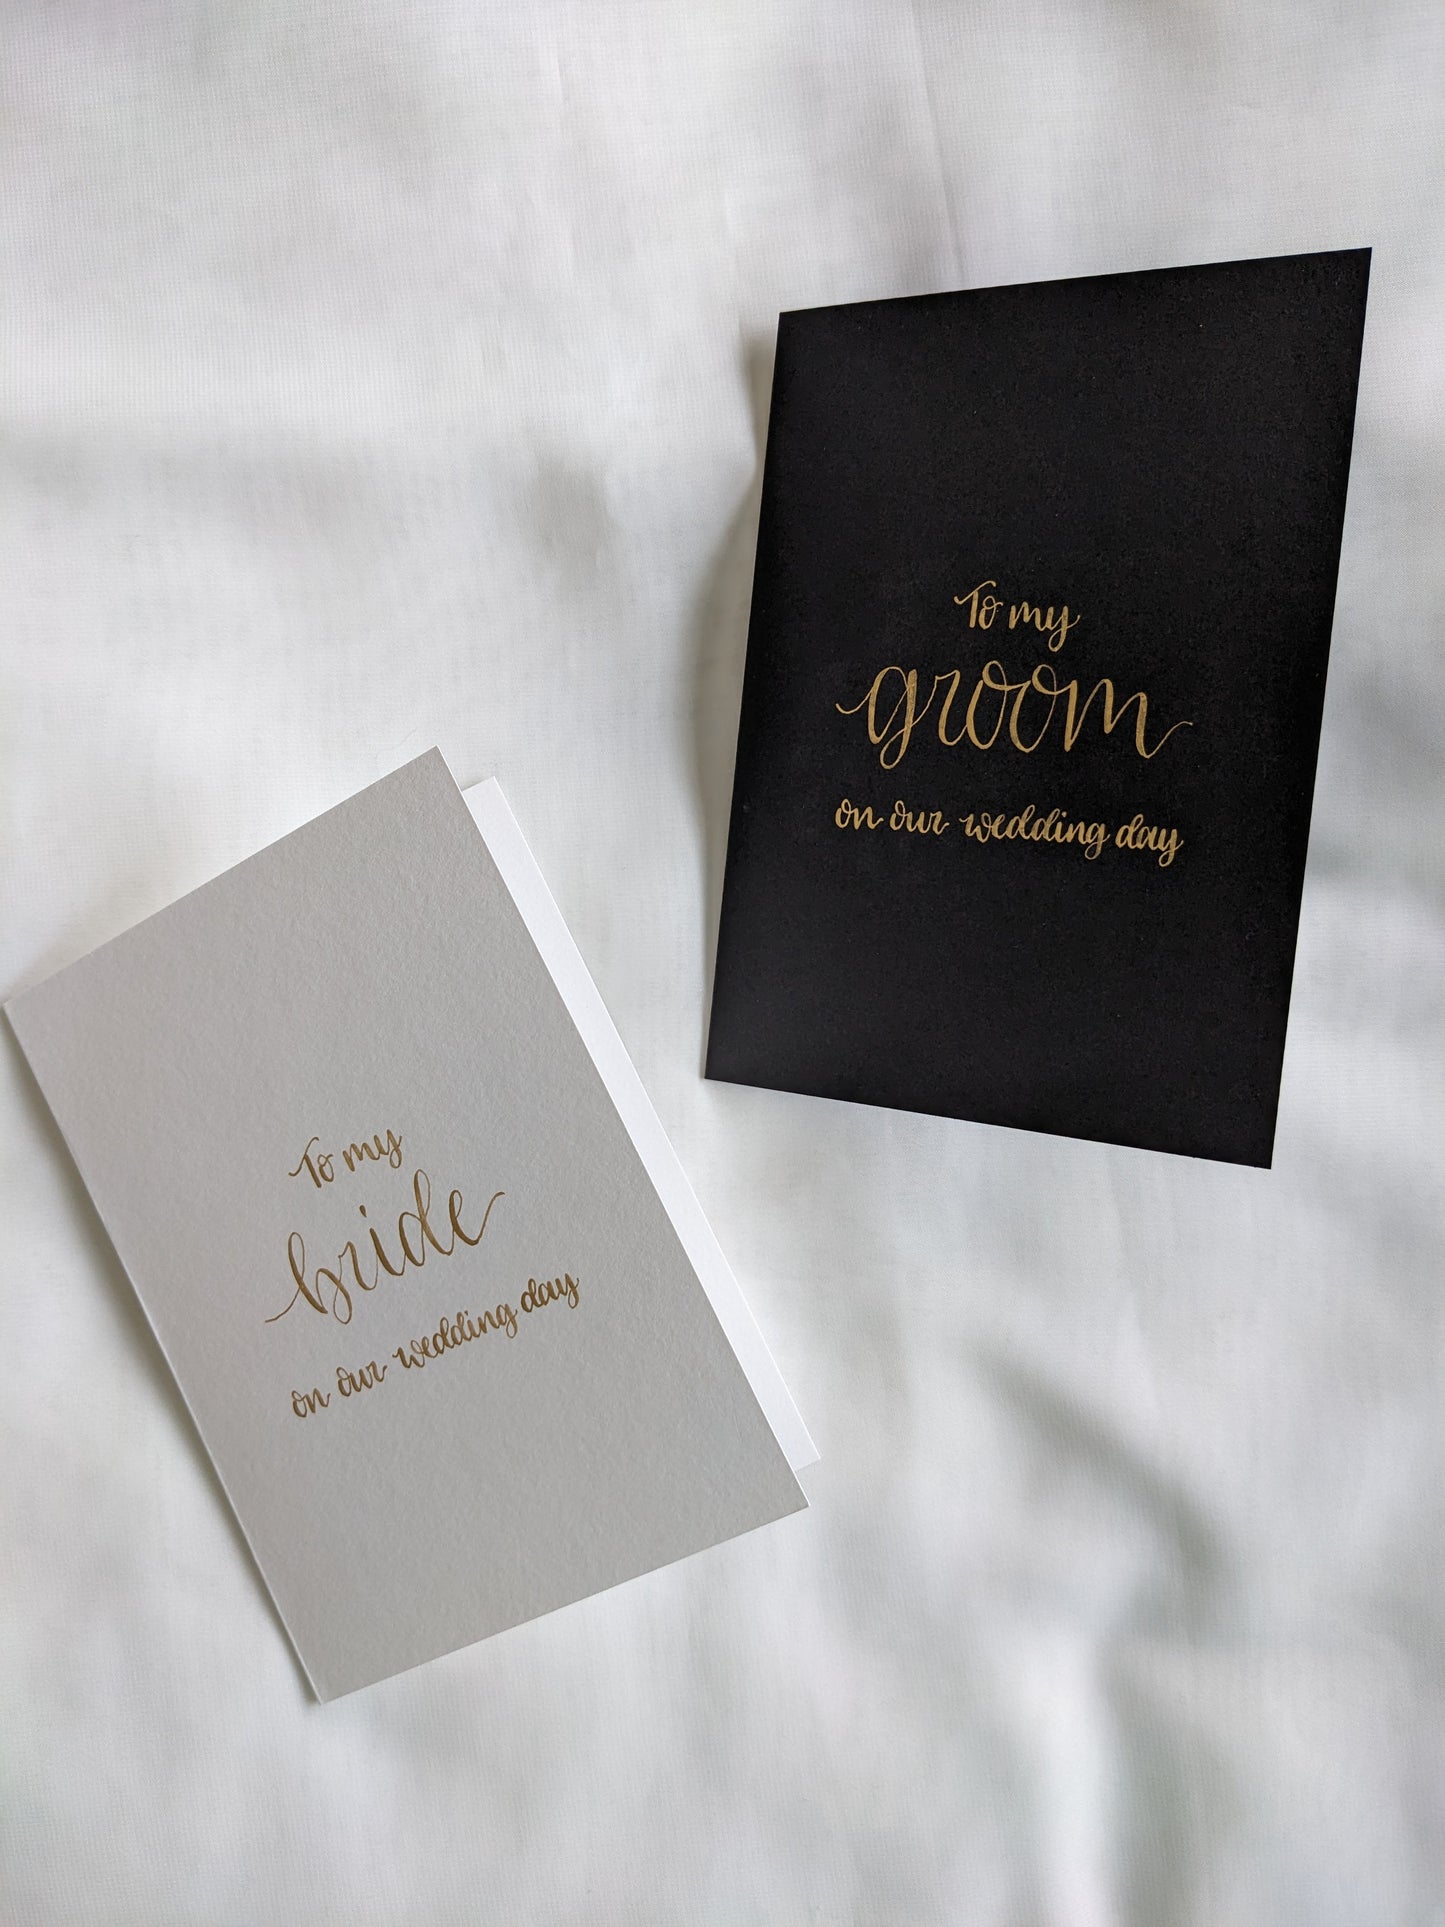 To my bride/to my groom card